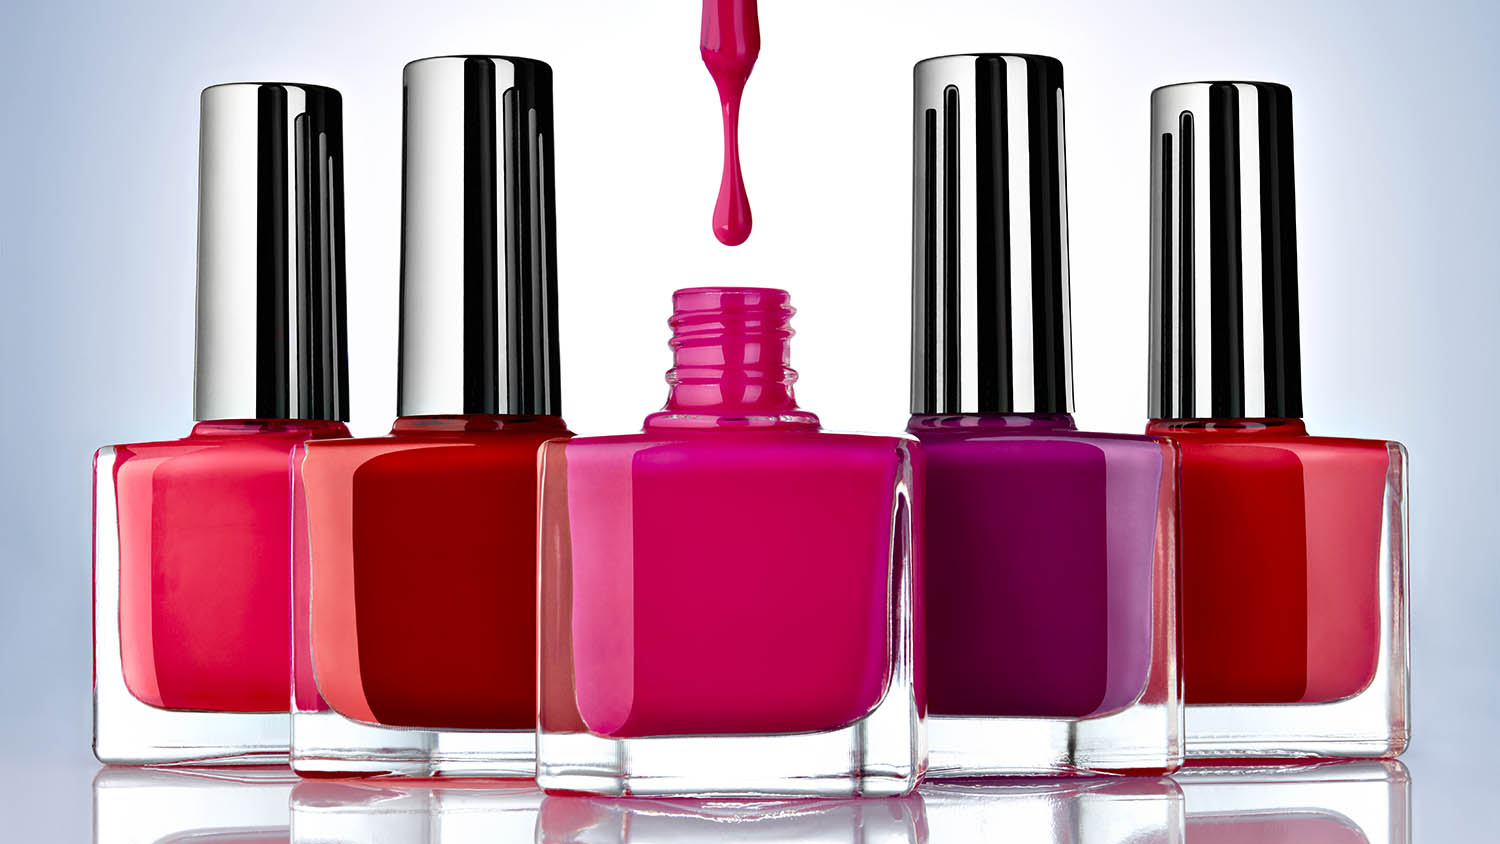 10 best nontoxic nail polishes of 2021 - TODAY